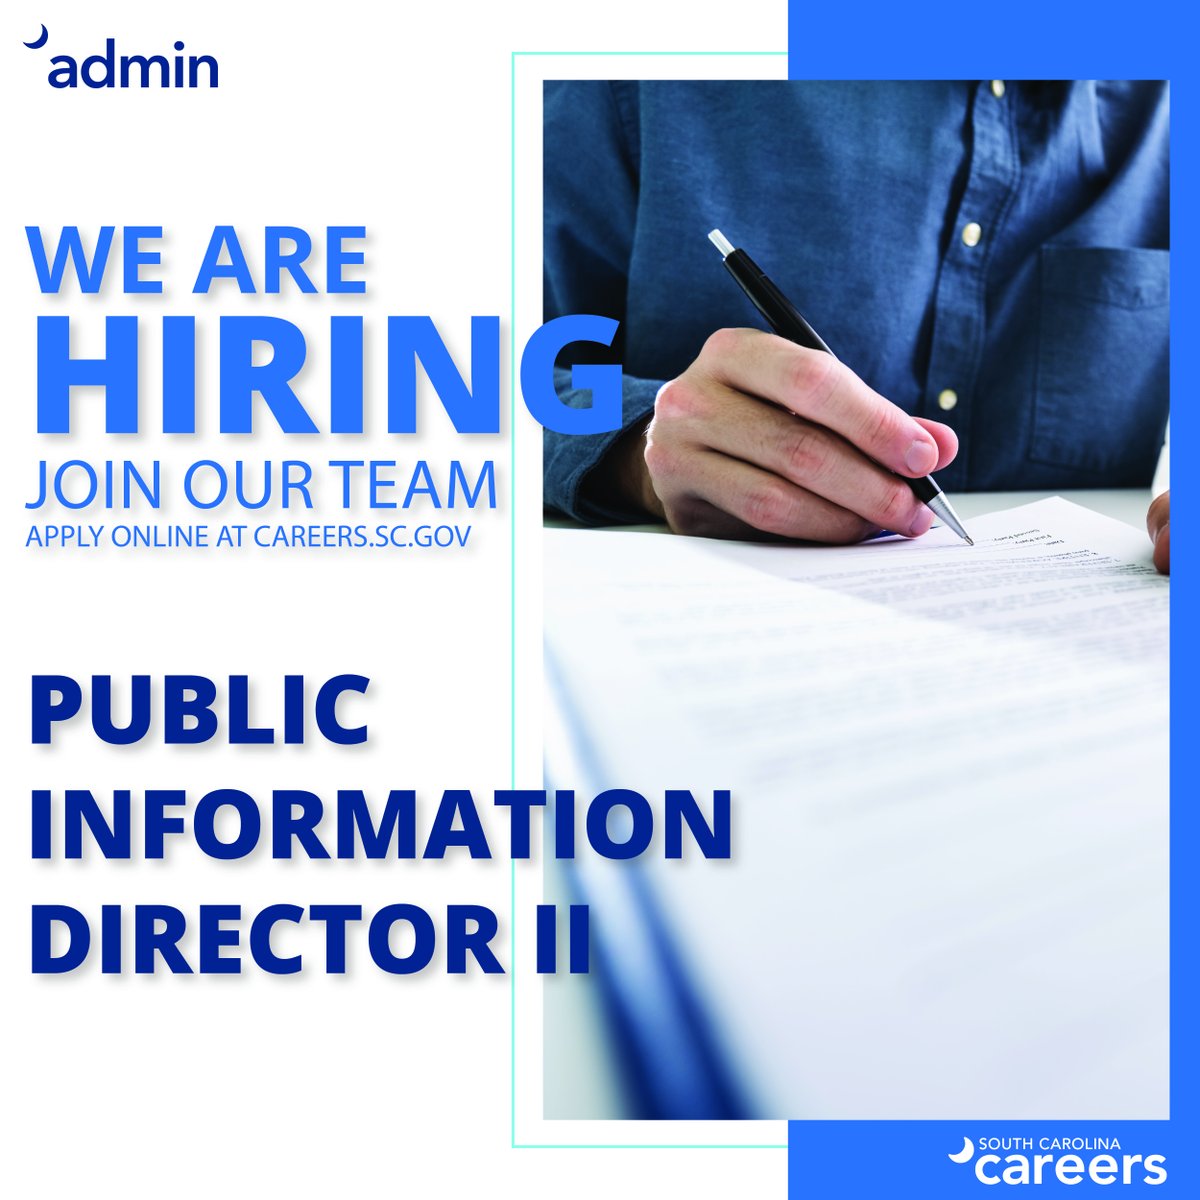 Are you an effective communicator, strong editor, creative thinker and team leader? If so, consider applying for the Public Information Director II position with the South Carolina Department of Administration! For more information and to apply, visit bit.ly/3Sm7Y88.